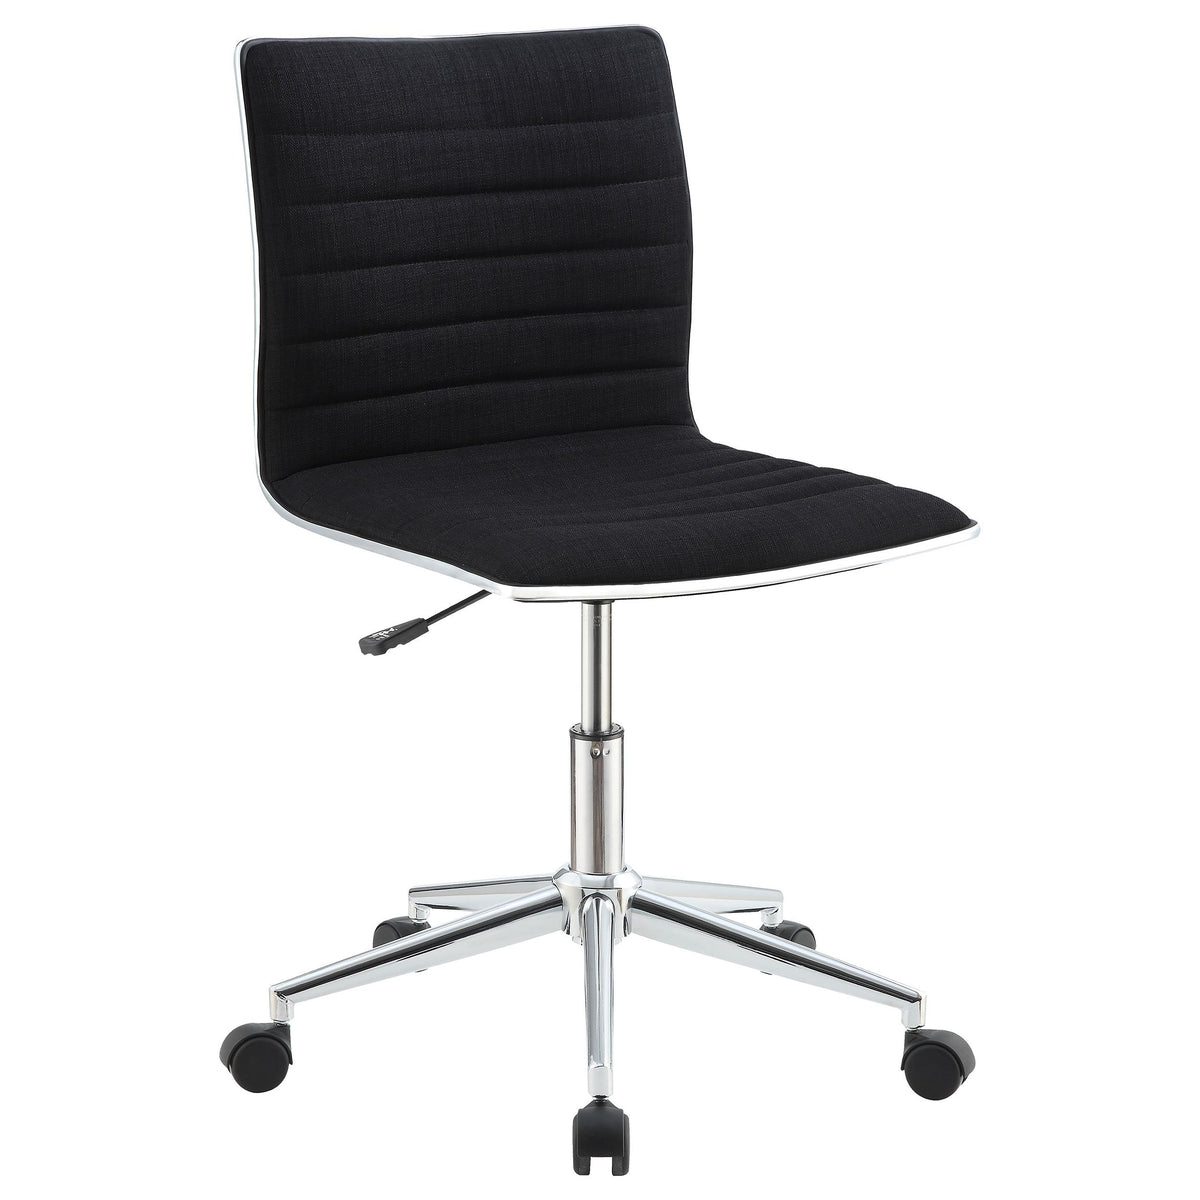 Chryses Adjustable Height Office Chair Black and Chrome Chryses Adjustable Height Office Chair Black and Chrome Half Price Furniture